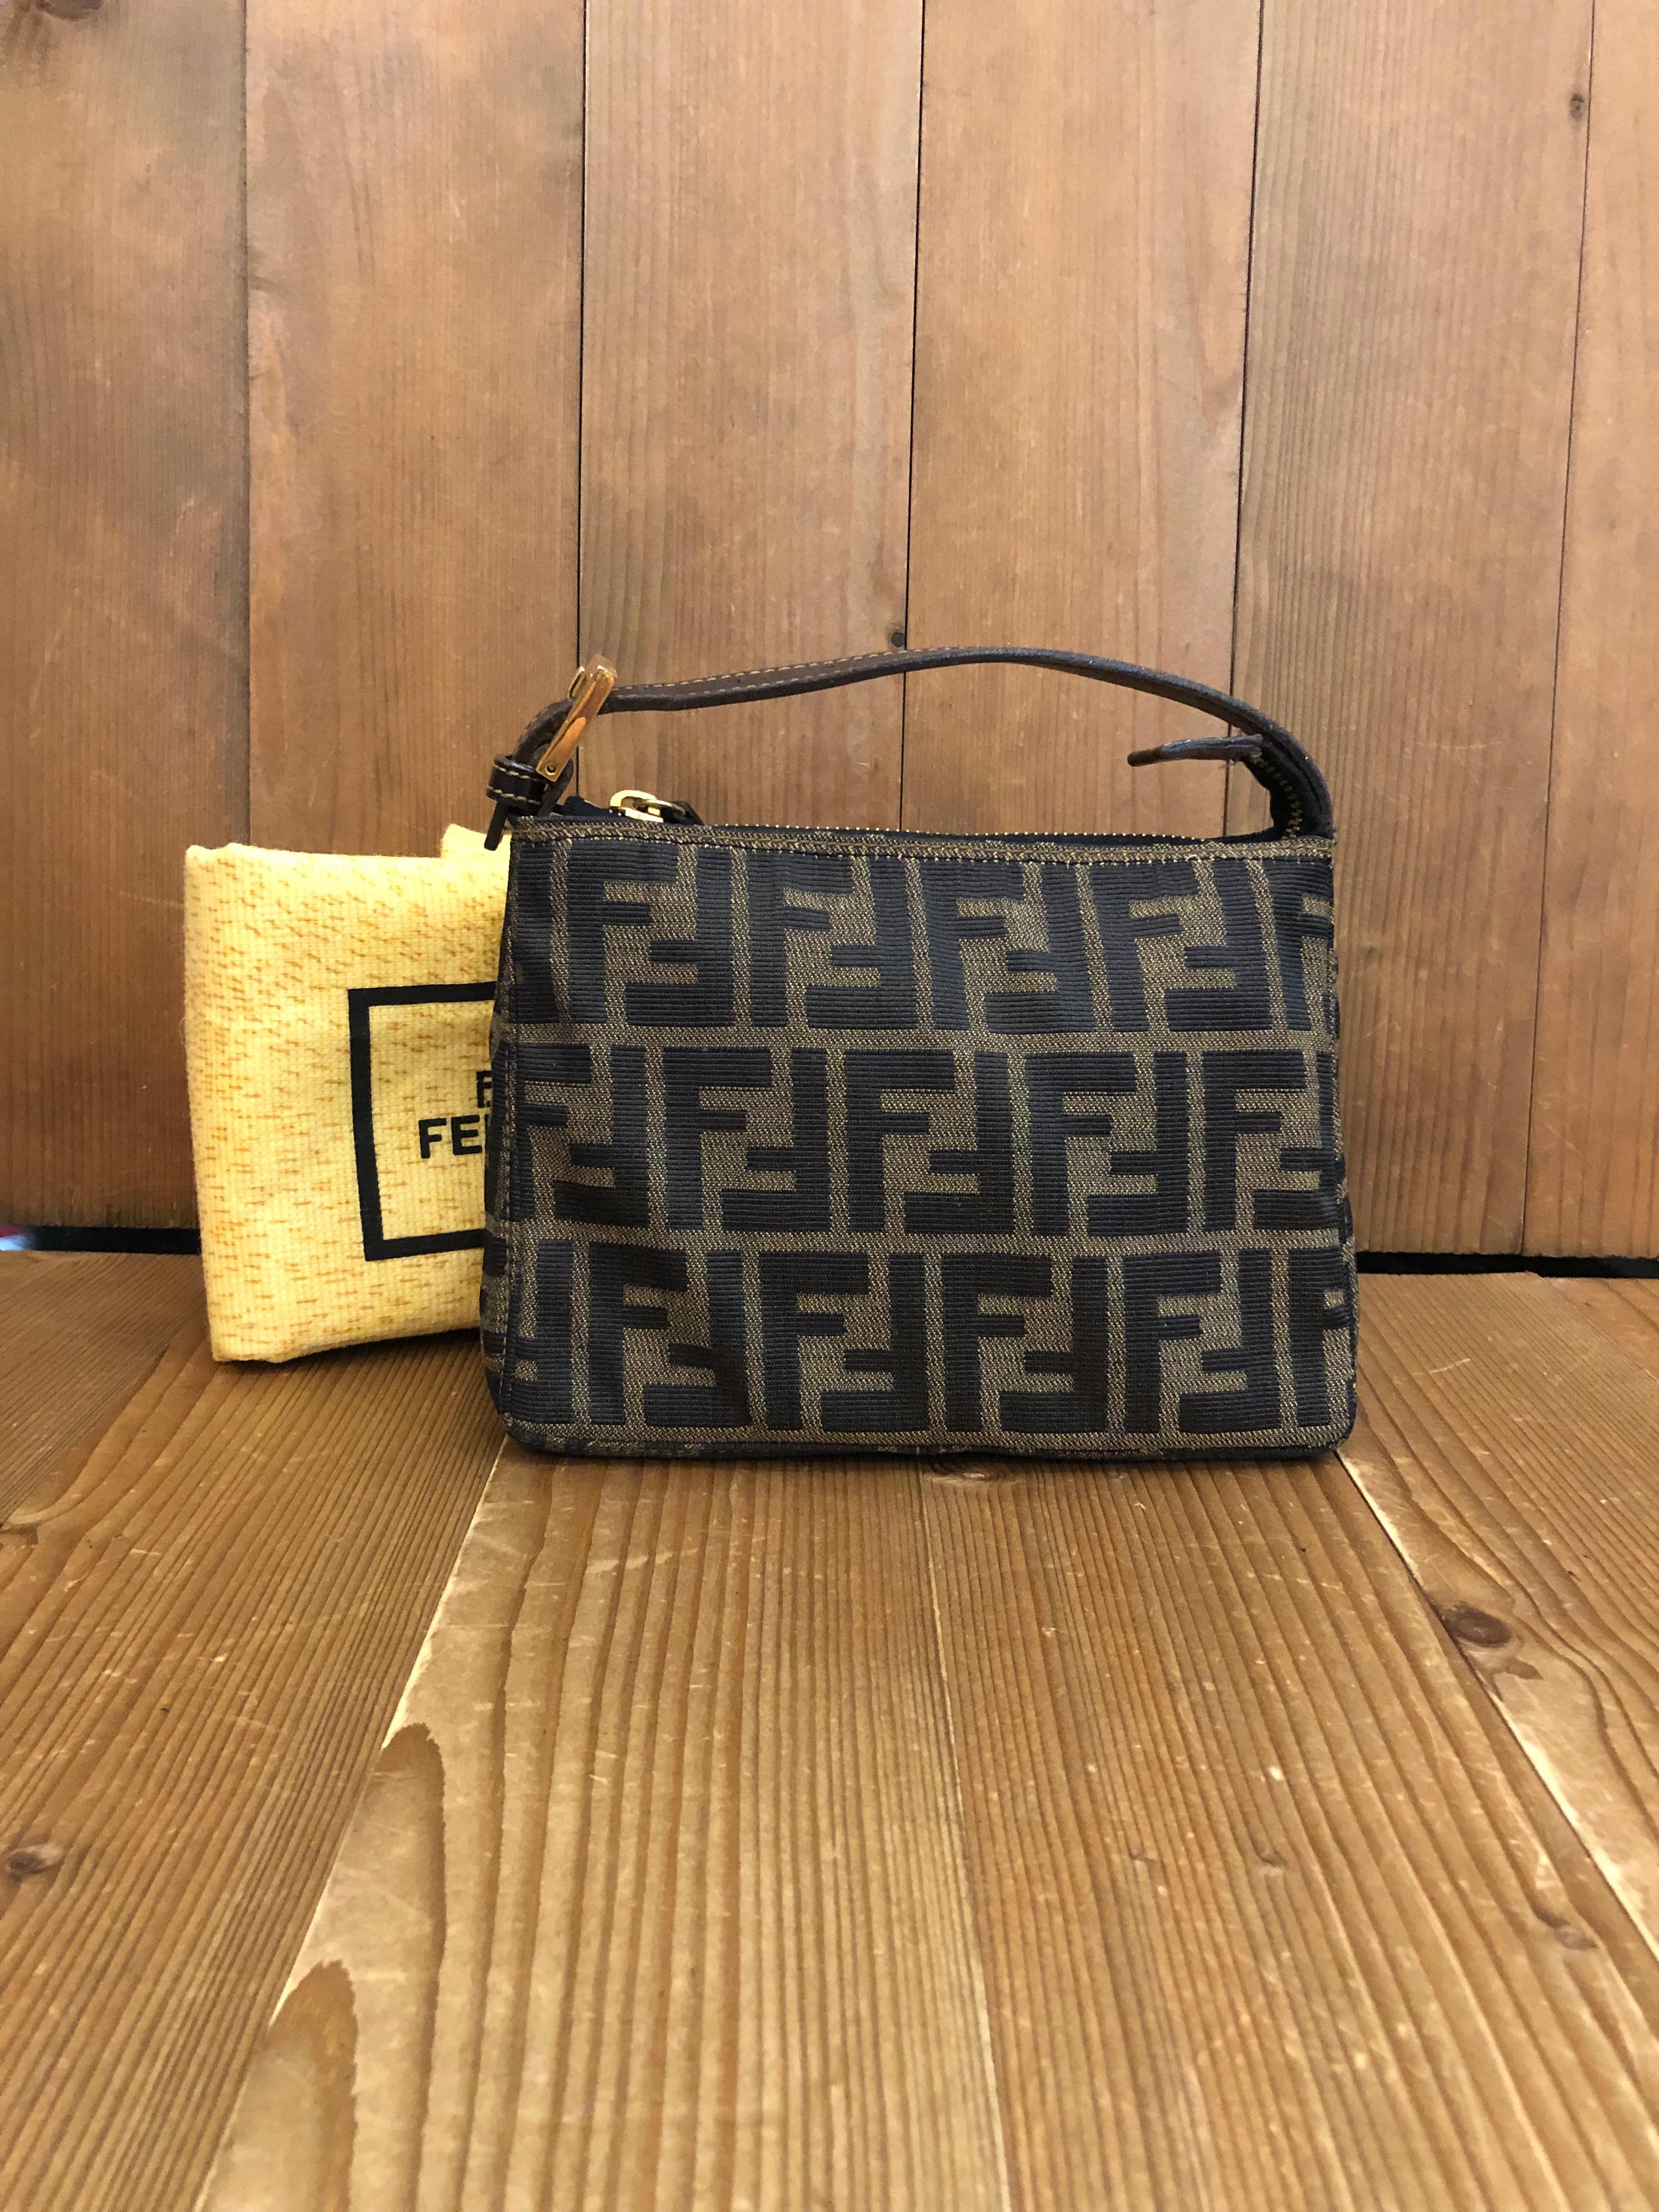 Vintage FENDI mini pouch handbag in Fendi's iconi Zucca jacquard in brown trimmed with brown leather. Zipper top closure opens to a new beige interior. Made in Italy. Measures 7.25 x 5.25 x 3 inches (fits plus-sized iPhone). Comes with dust